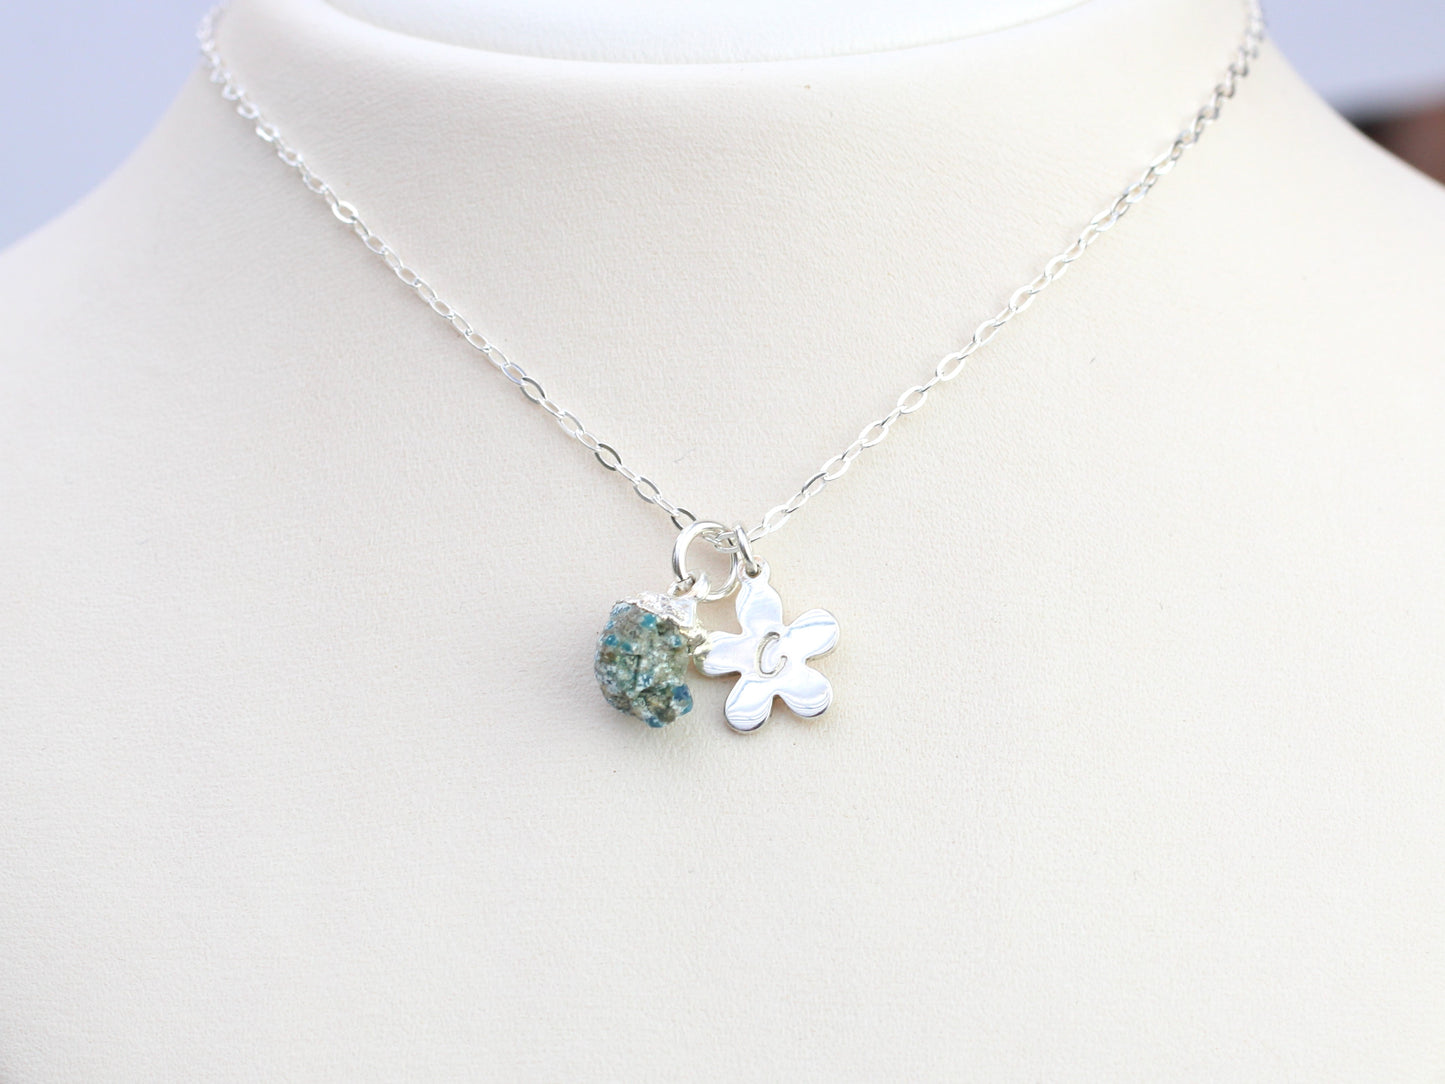 Personalised turquoise necklace in silver.